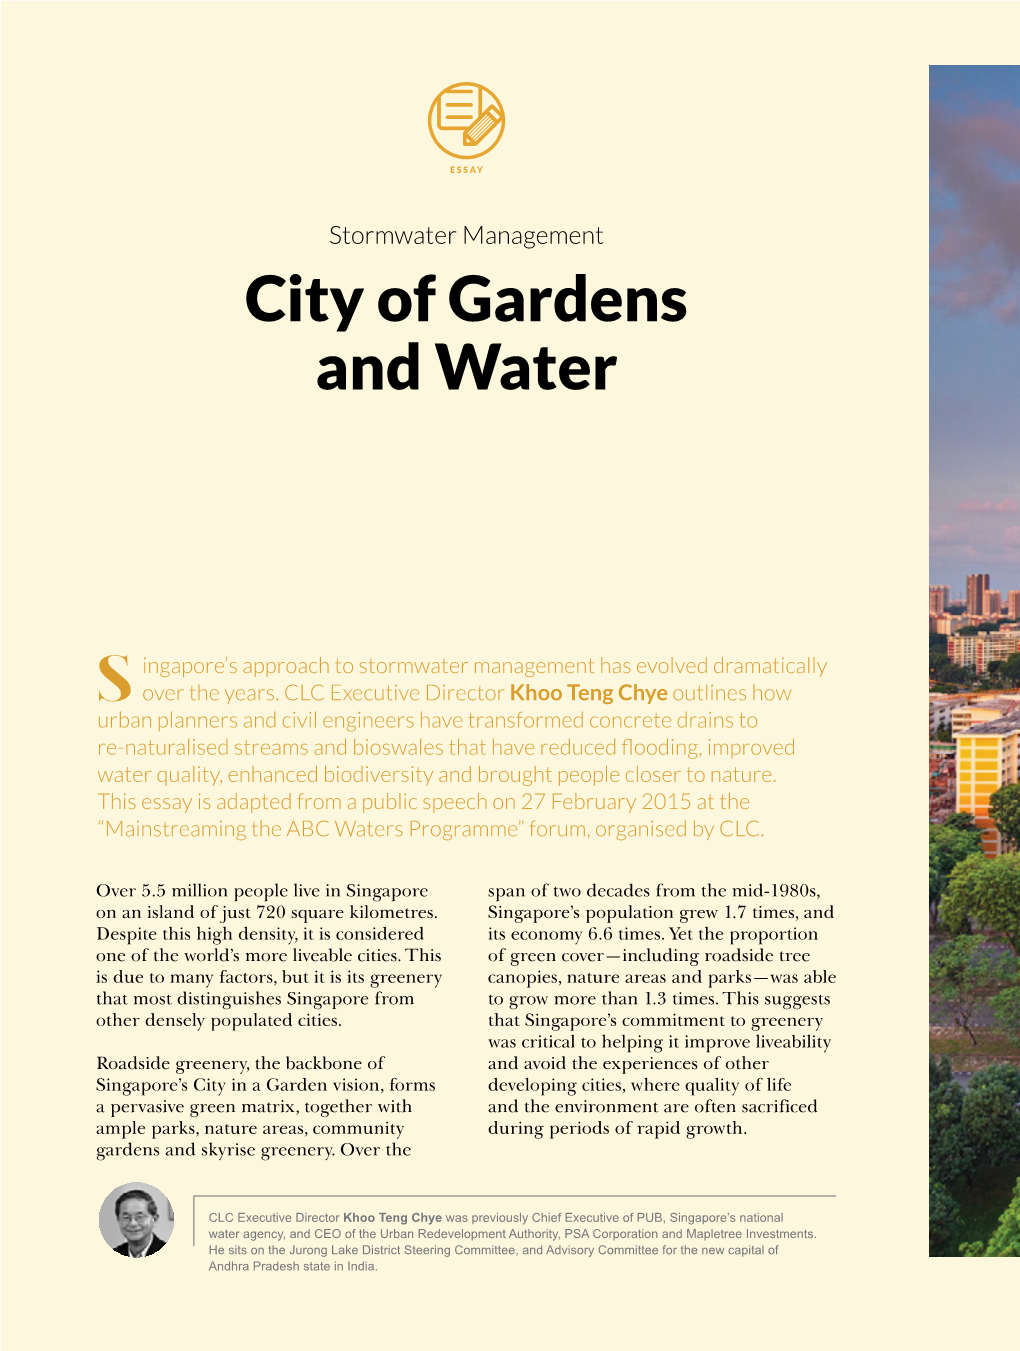 City of Gardens and Water